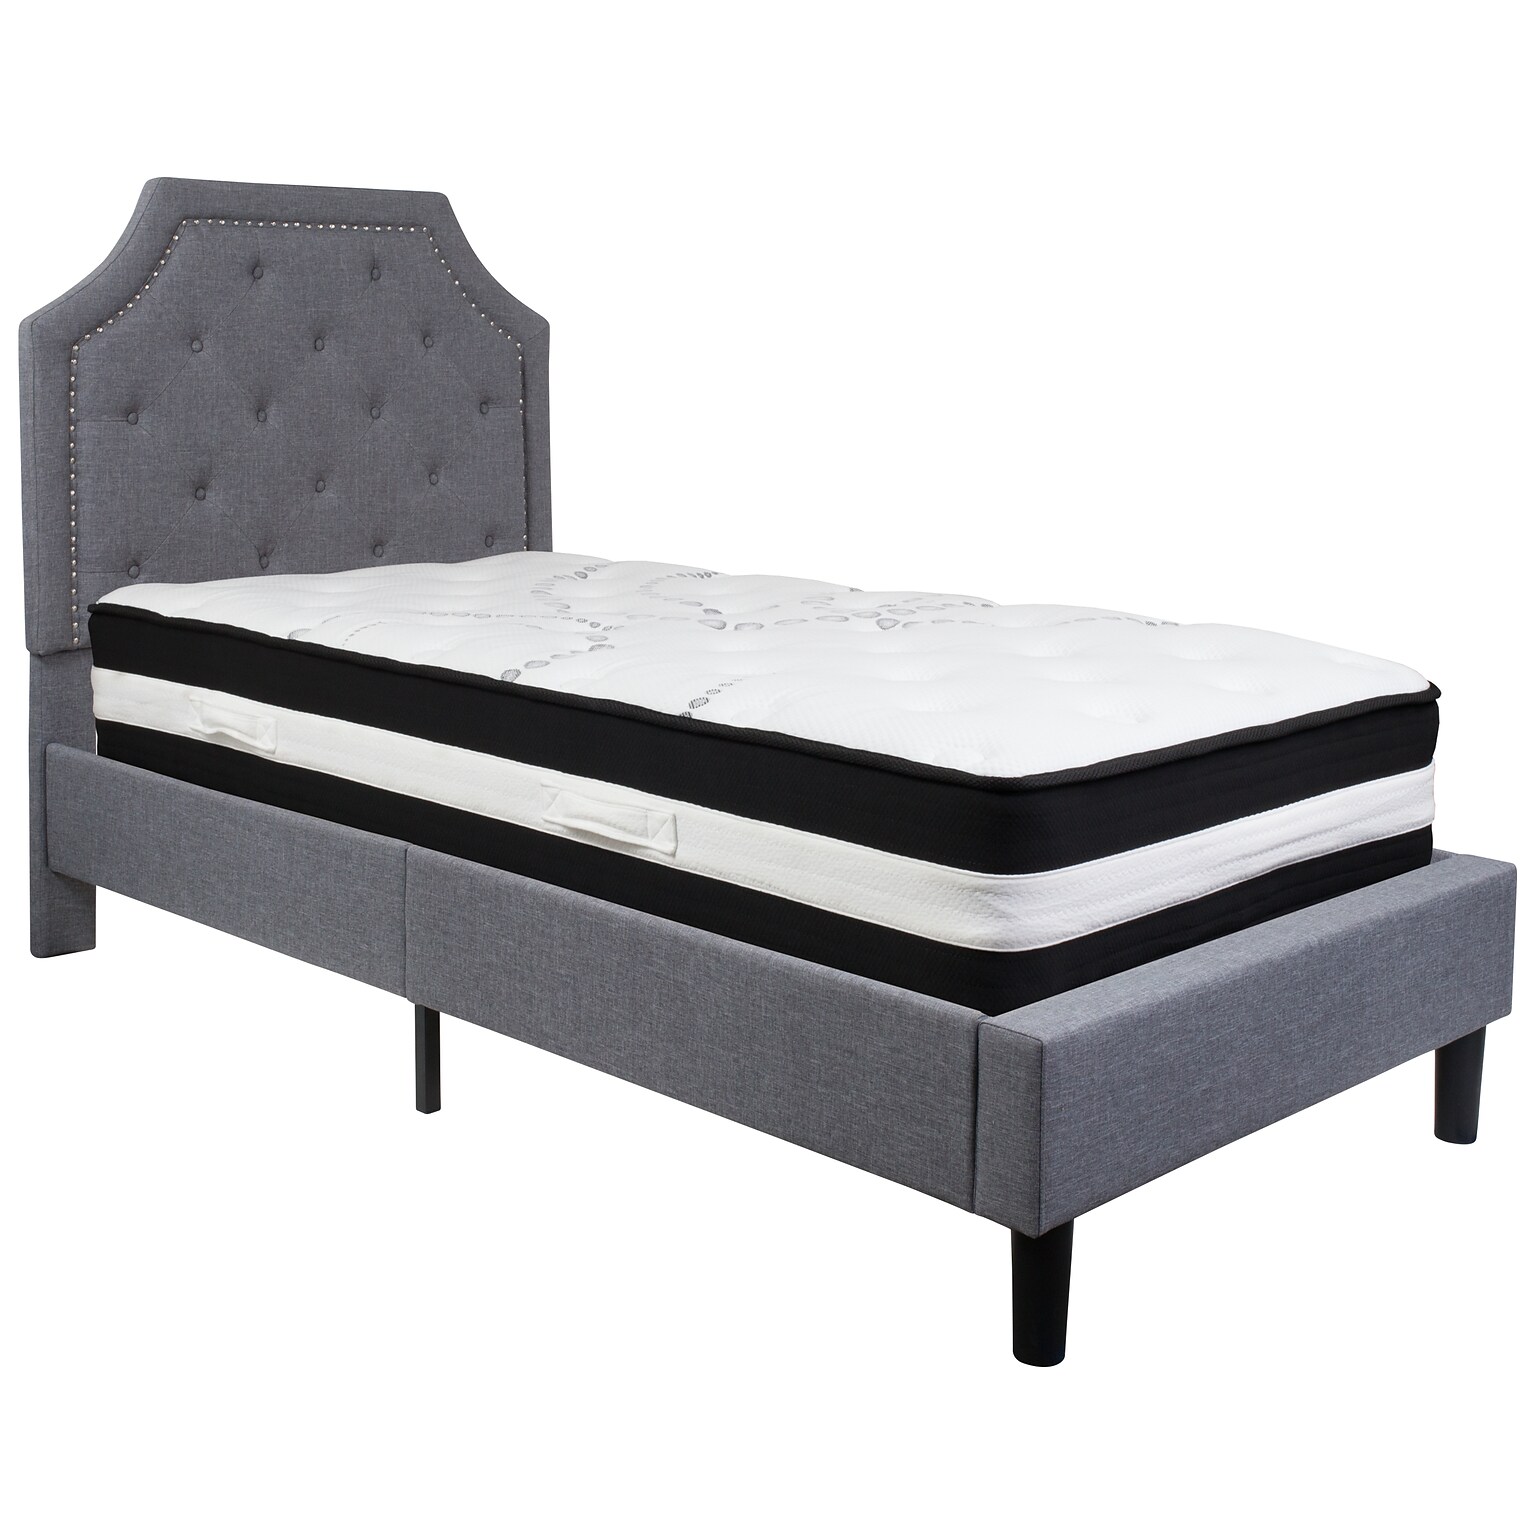 Flash Furniture Brighton Tufted Upholstered Platform Bed in Light Gray Fabric with Pocket Spring Mattress, Twin (SLBM9)